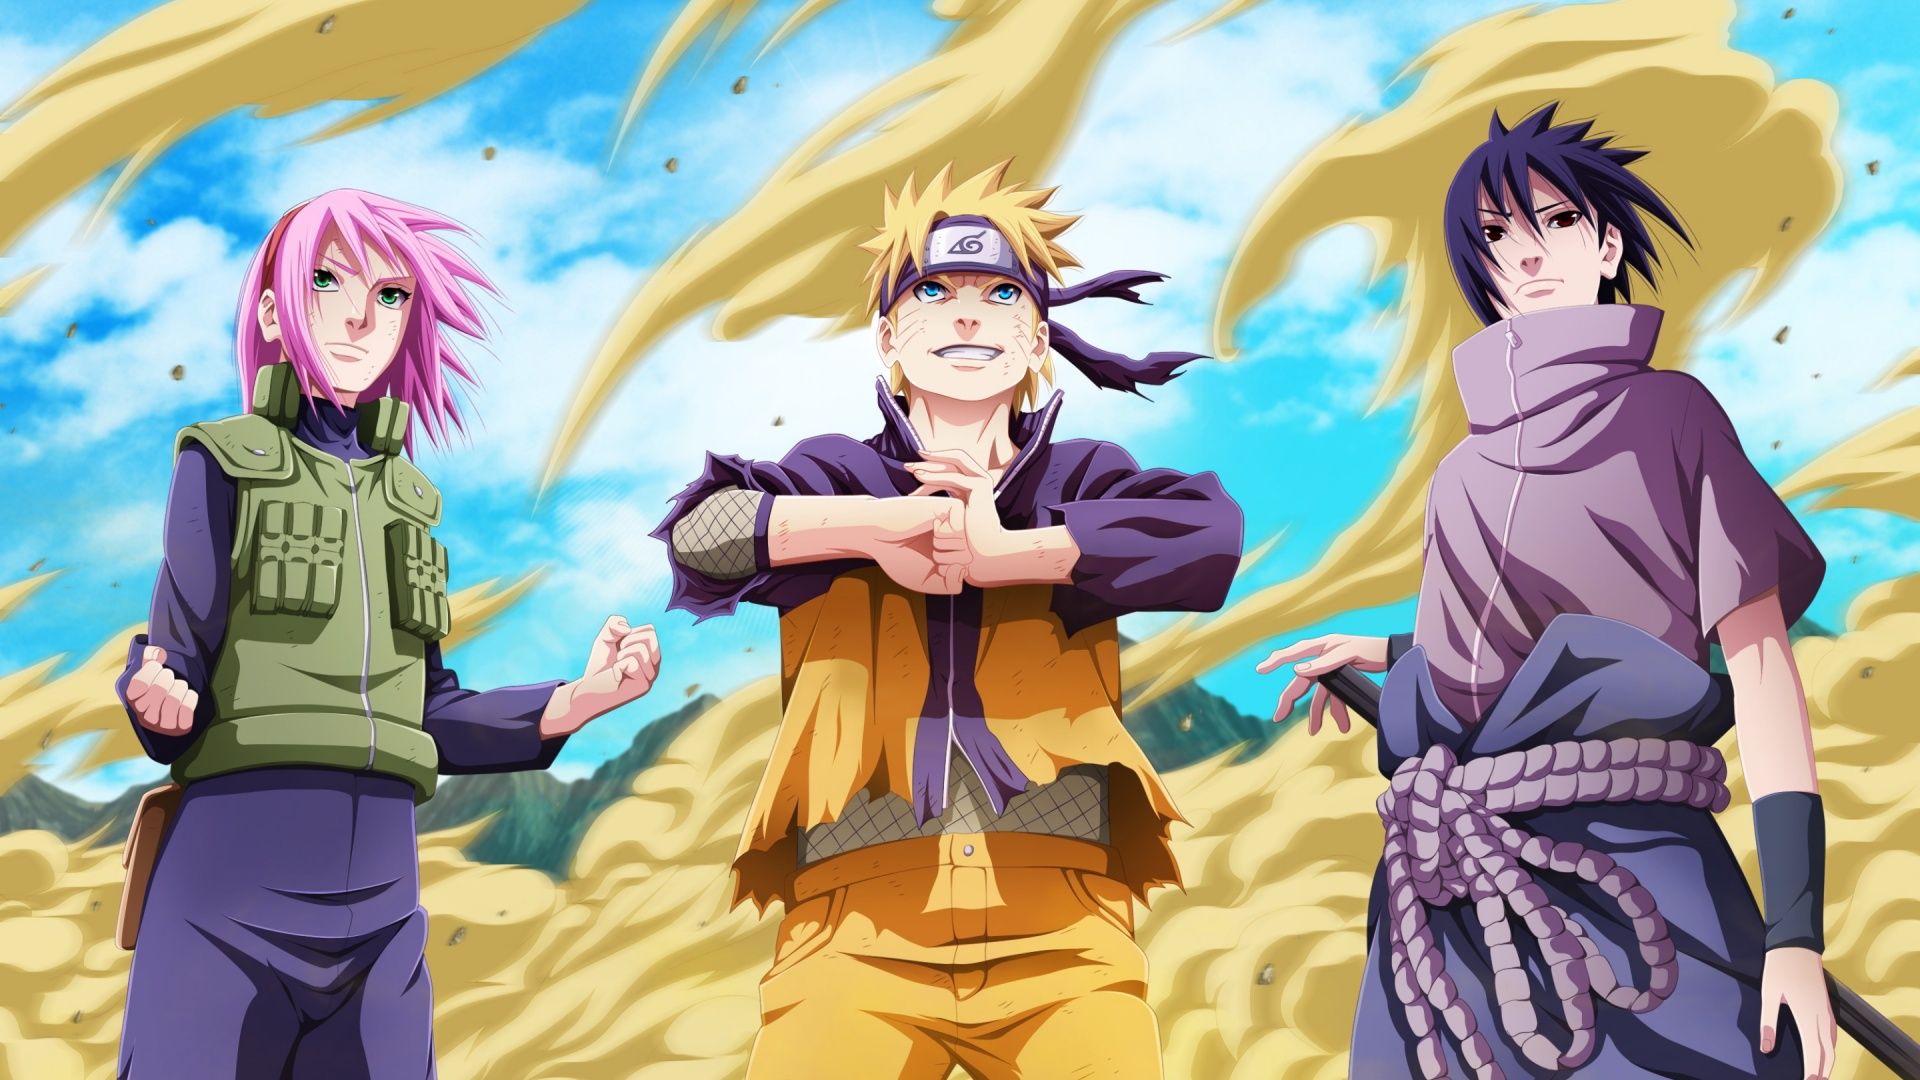 Free Download 4k Naruto Wallpapers Top 4k Naruto Backgrounds 19x1080 For Your Desktop Mobile Tablet Explore 77 Naruto Shippuden Wallpaper For Desktop Naruto Laptop Wallpaper Naruto Wallpapers Download